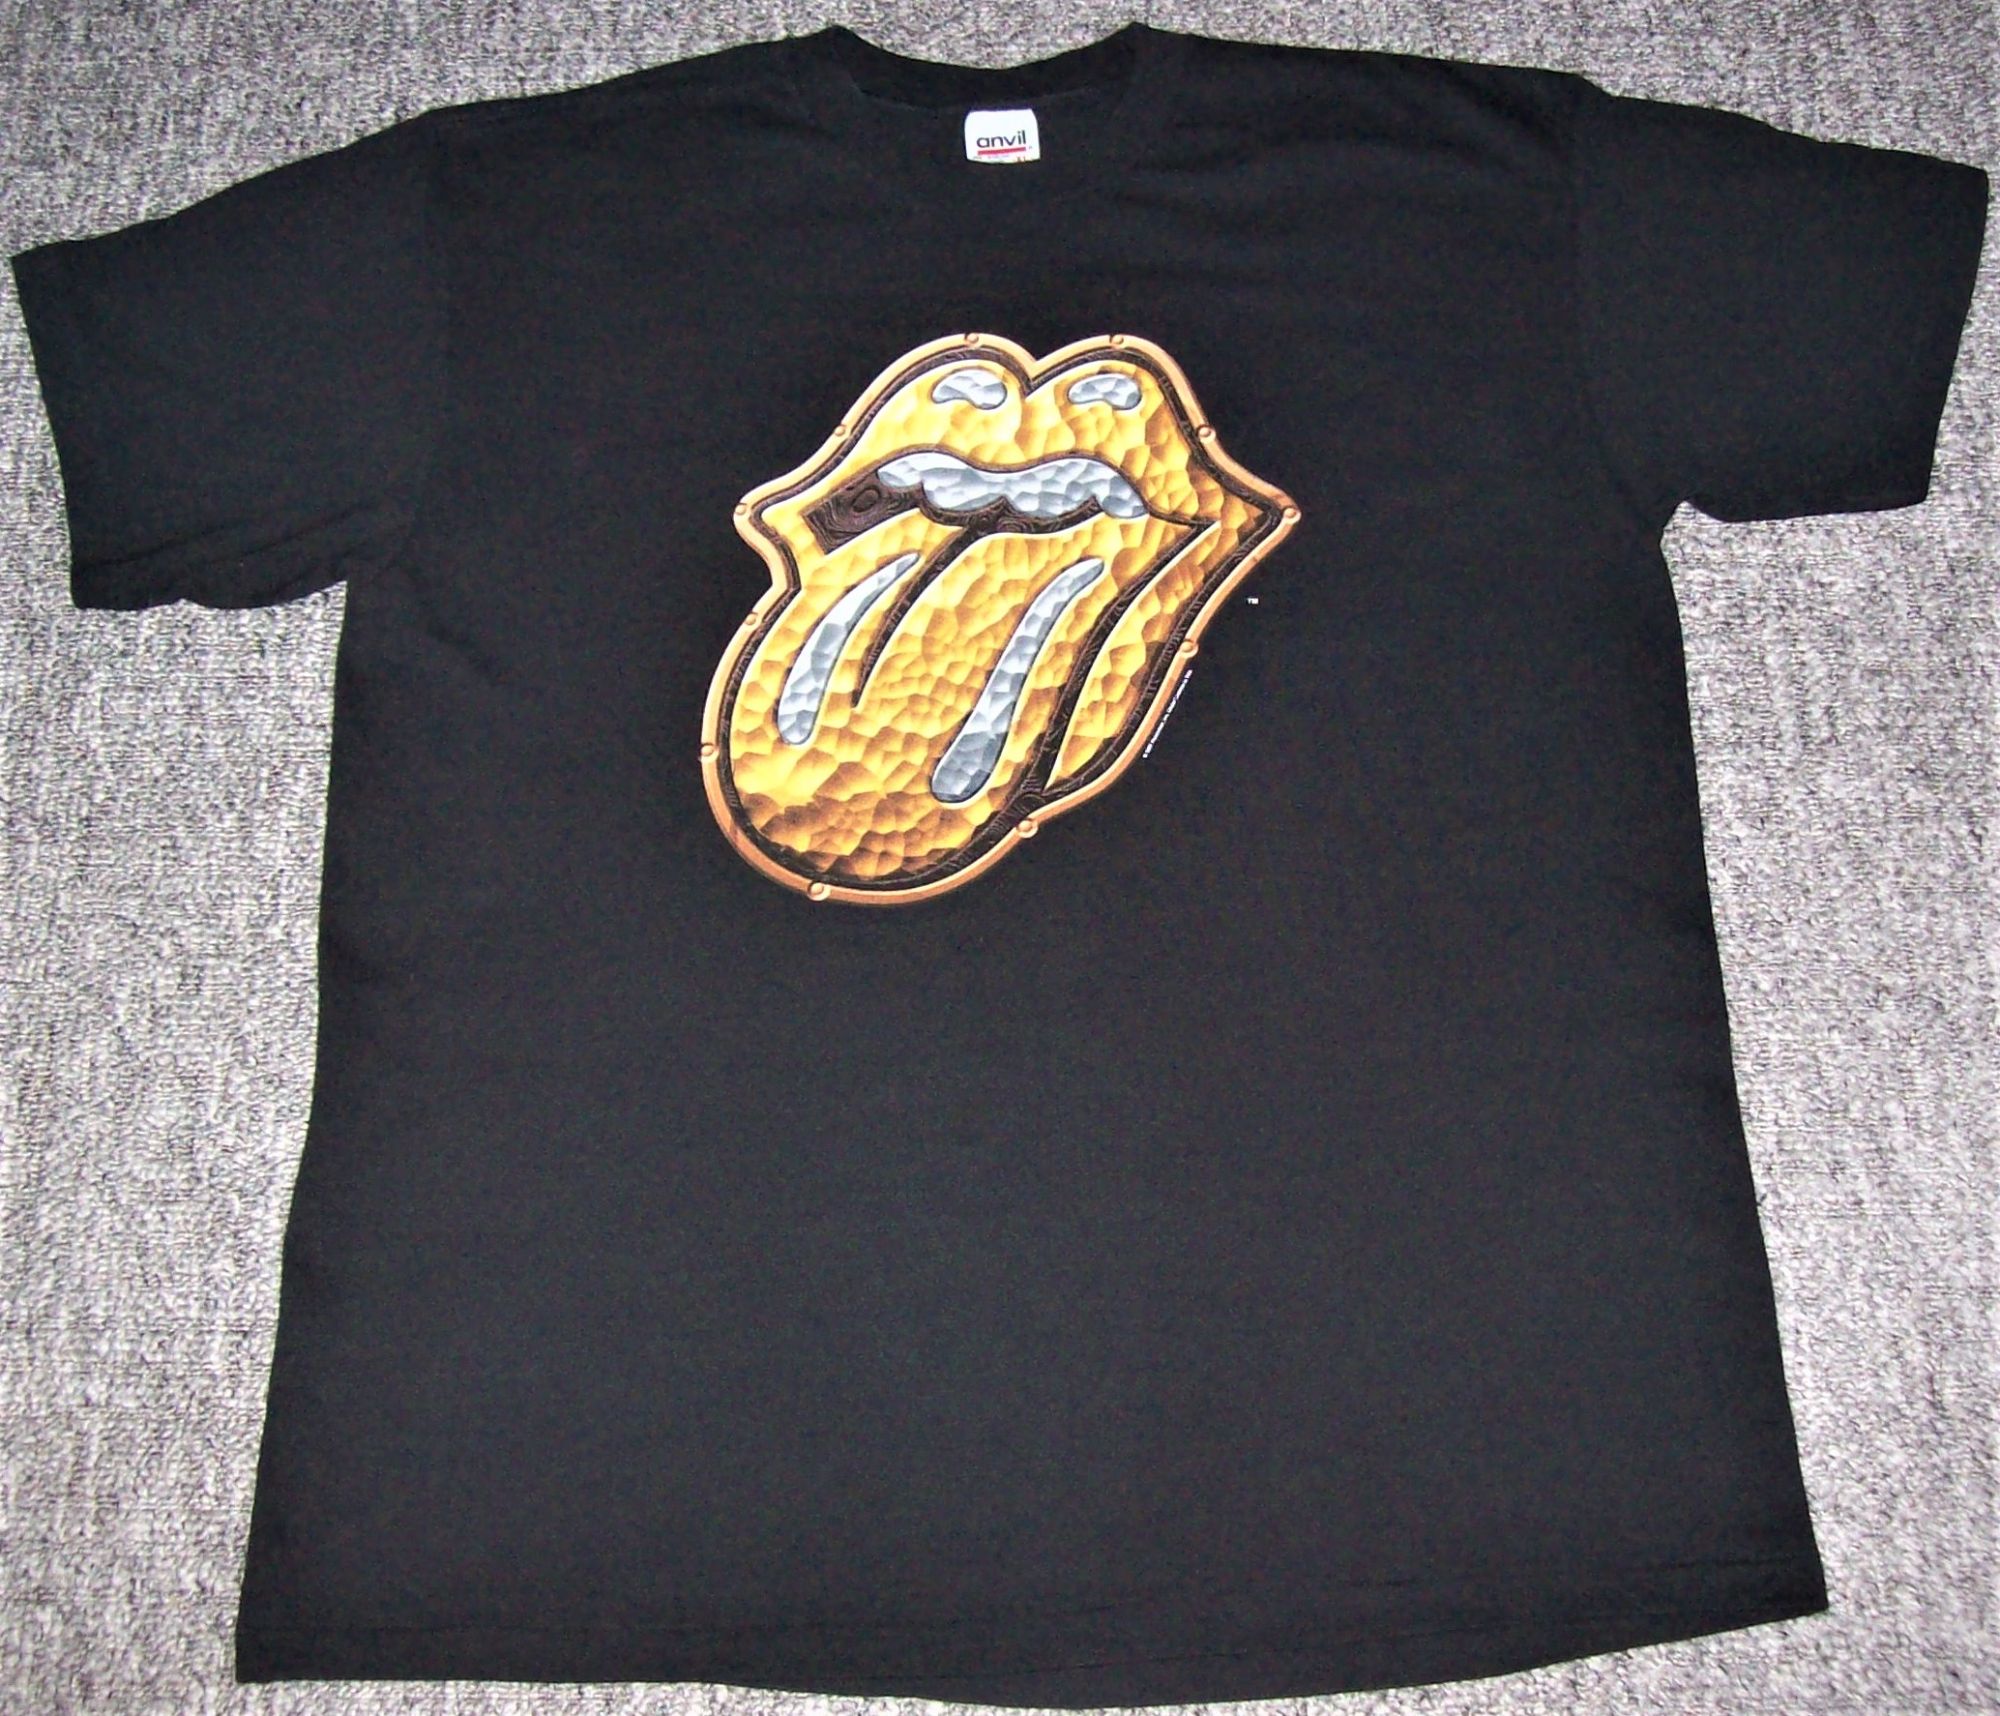 THE ROLLING STONES CONCERT T-SHIRT 'DA STONES' SOLDIER FIELD CHICAGO SEPT 2